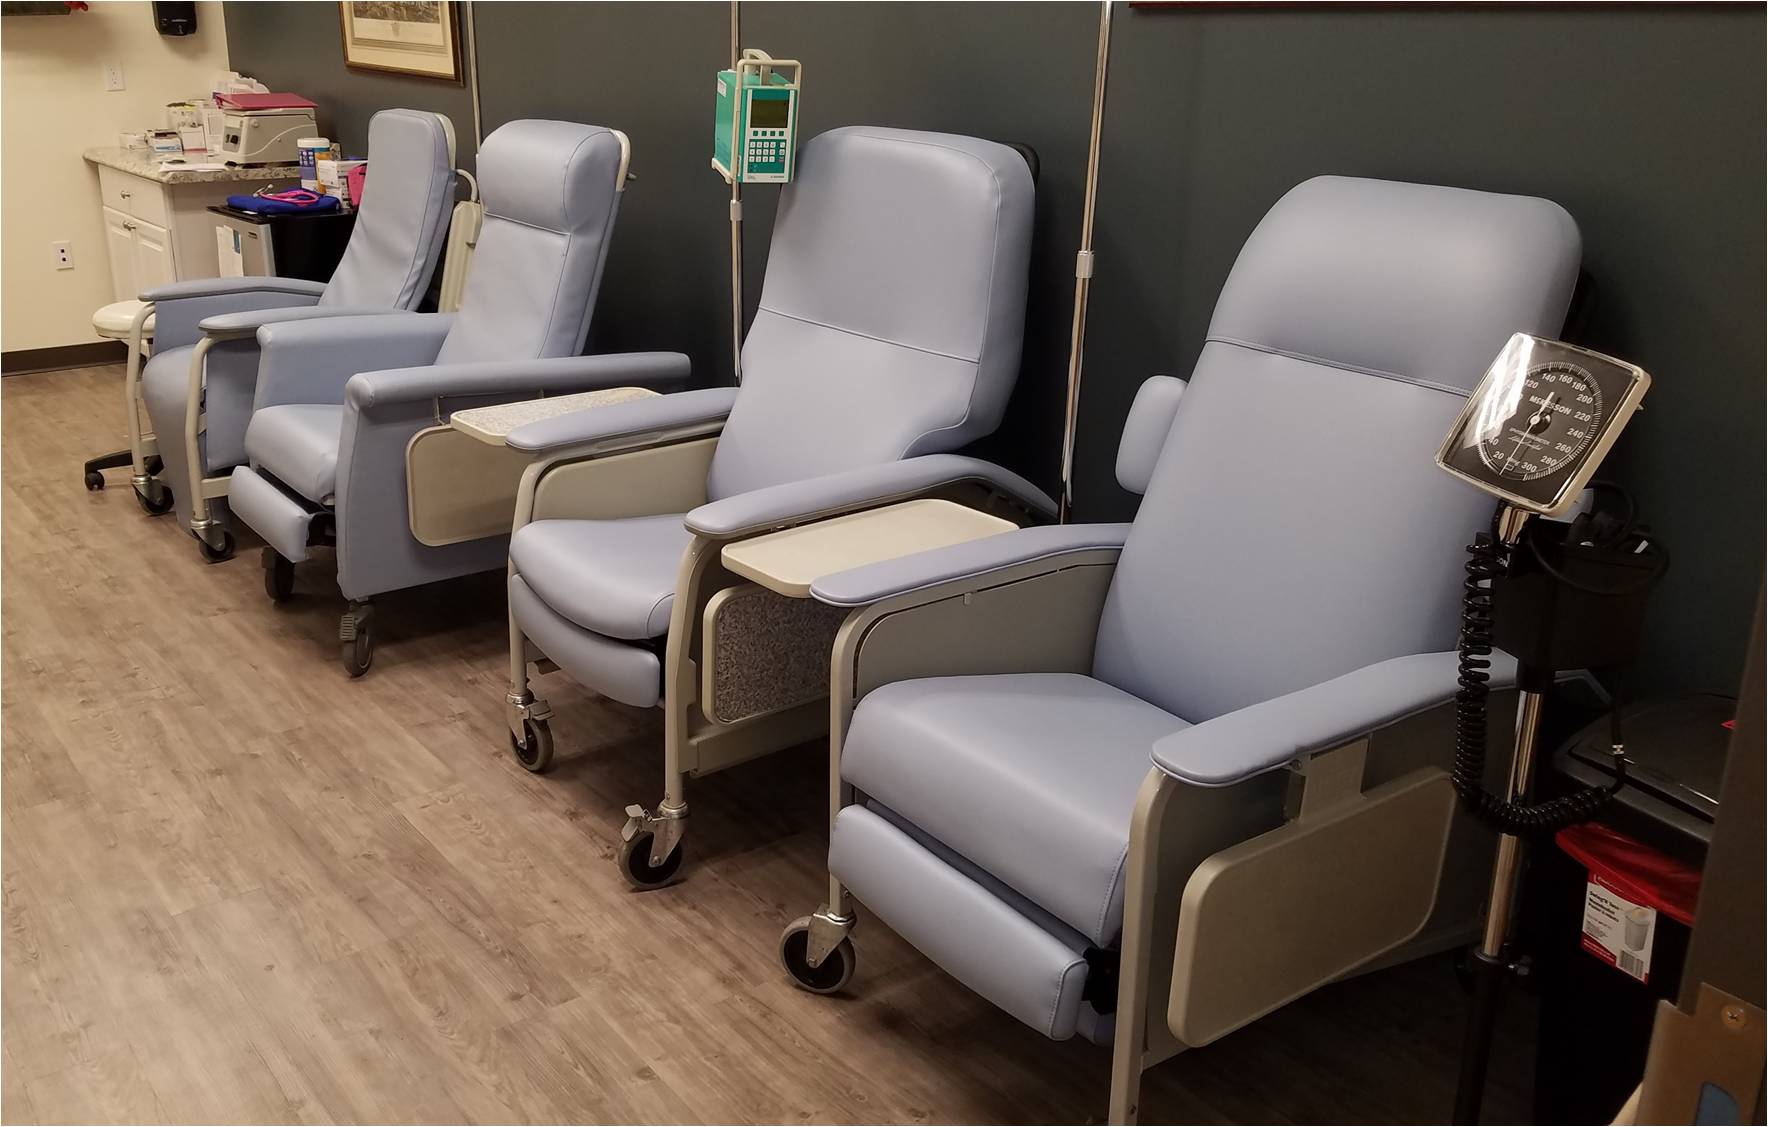 Medical recliner chairs